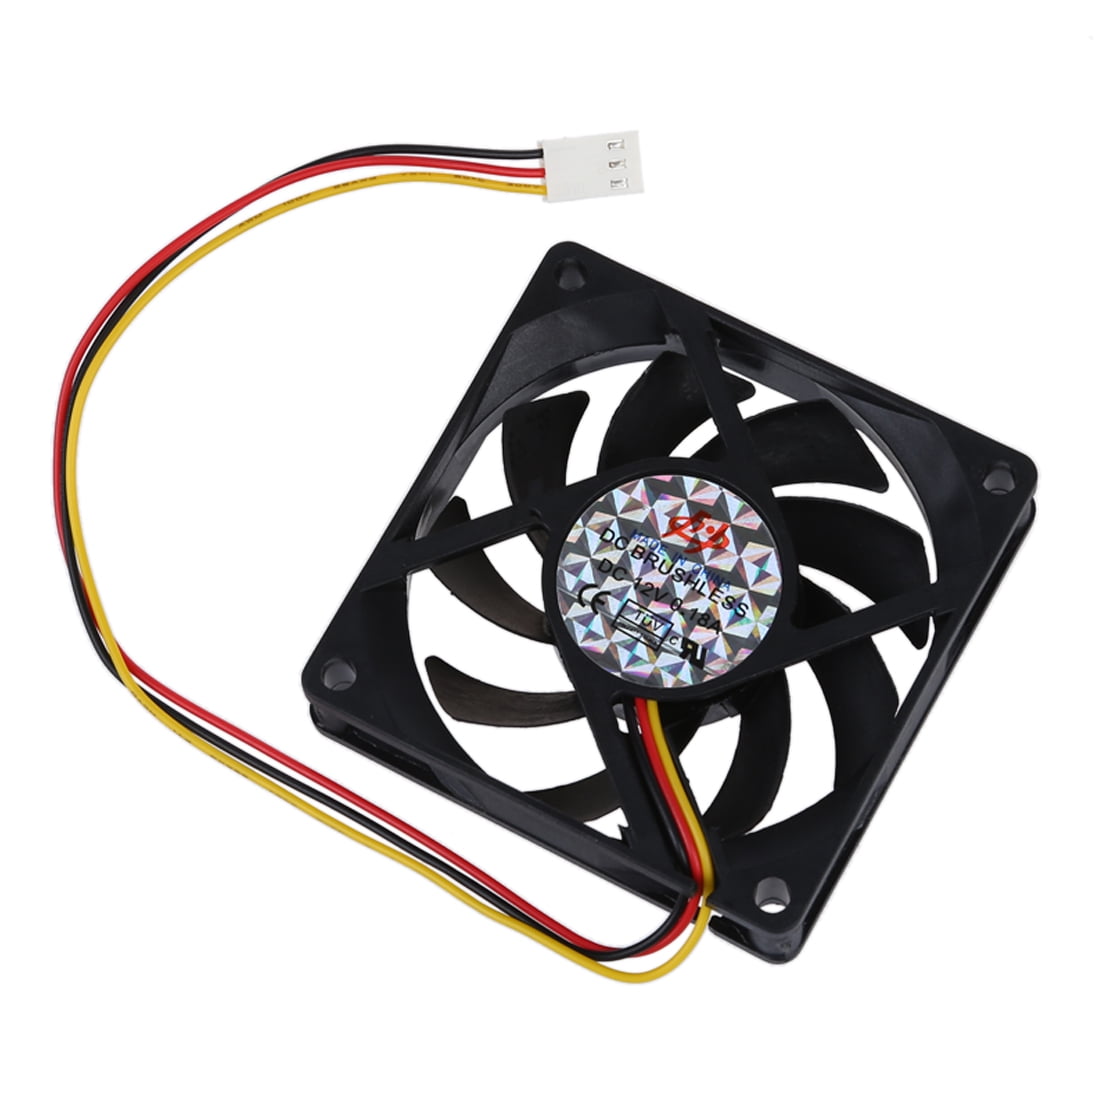 move Beak cube 70mm PC Chassis Computer Case 3 Pin Fan Cooling Cooler - Walmart.com